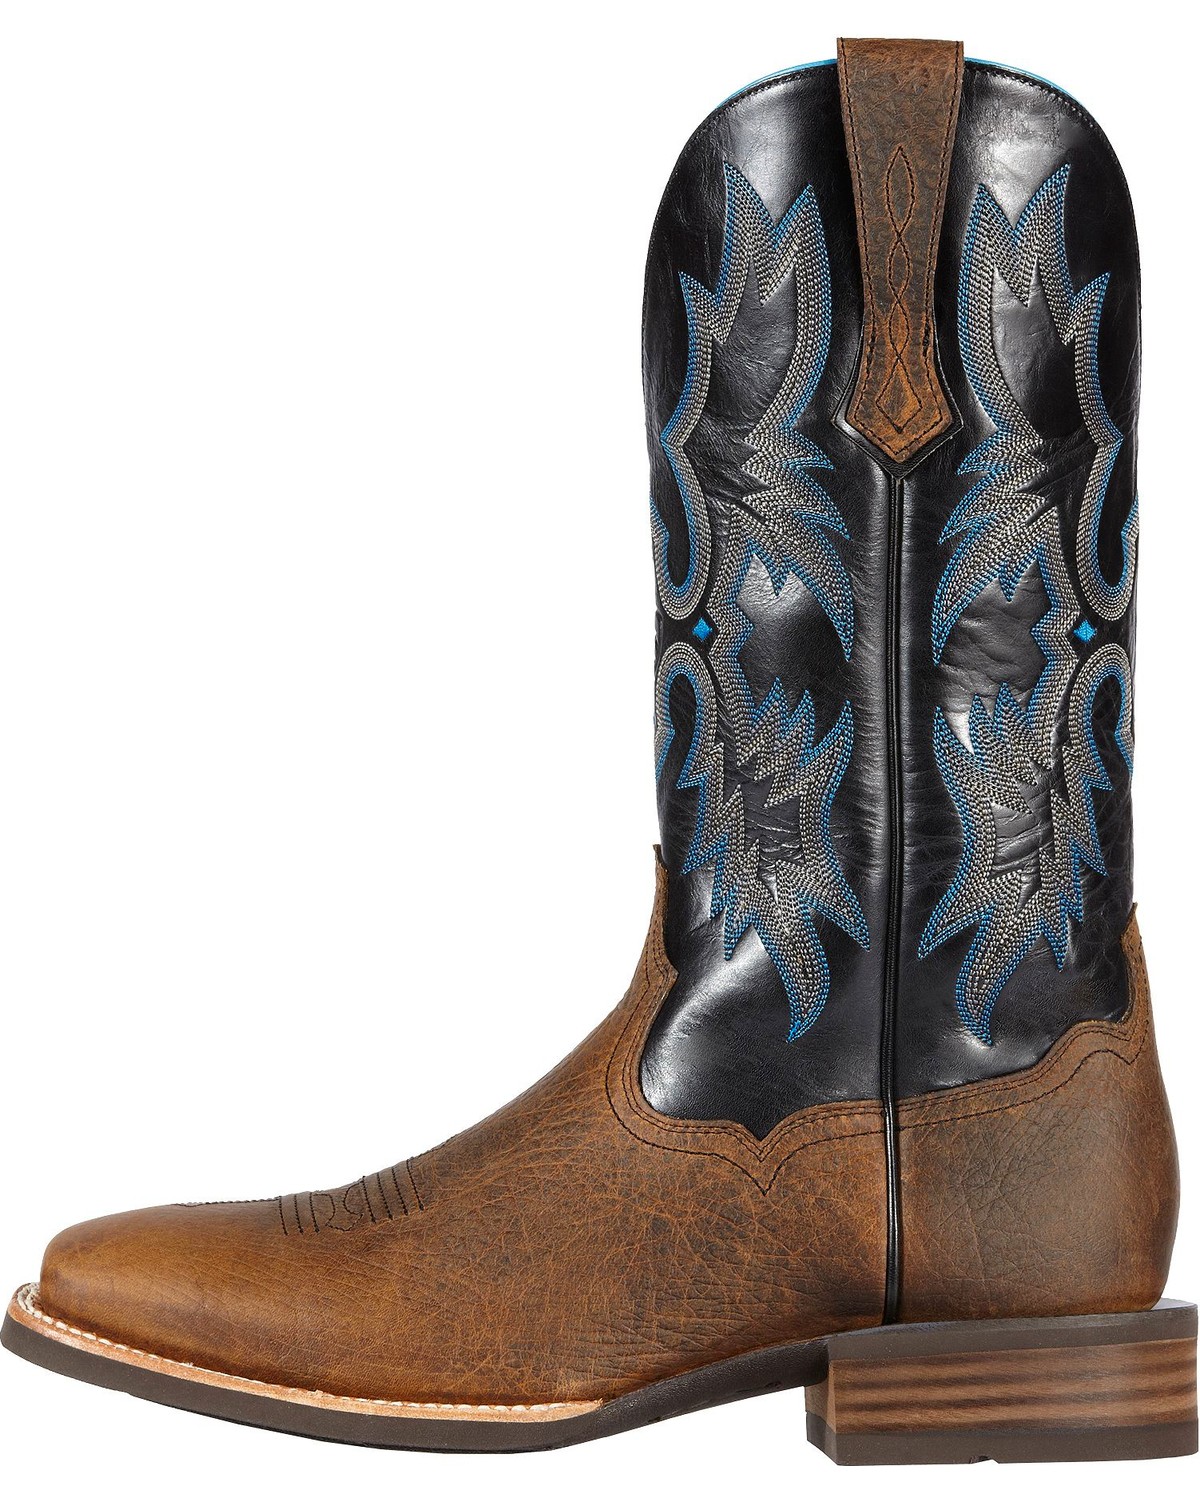 Ariat Tombstone Cowboy Boots - Wide Square Toe | Sheplers